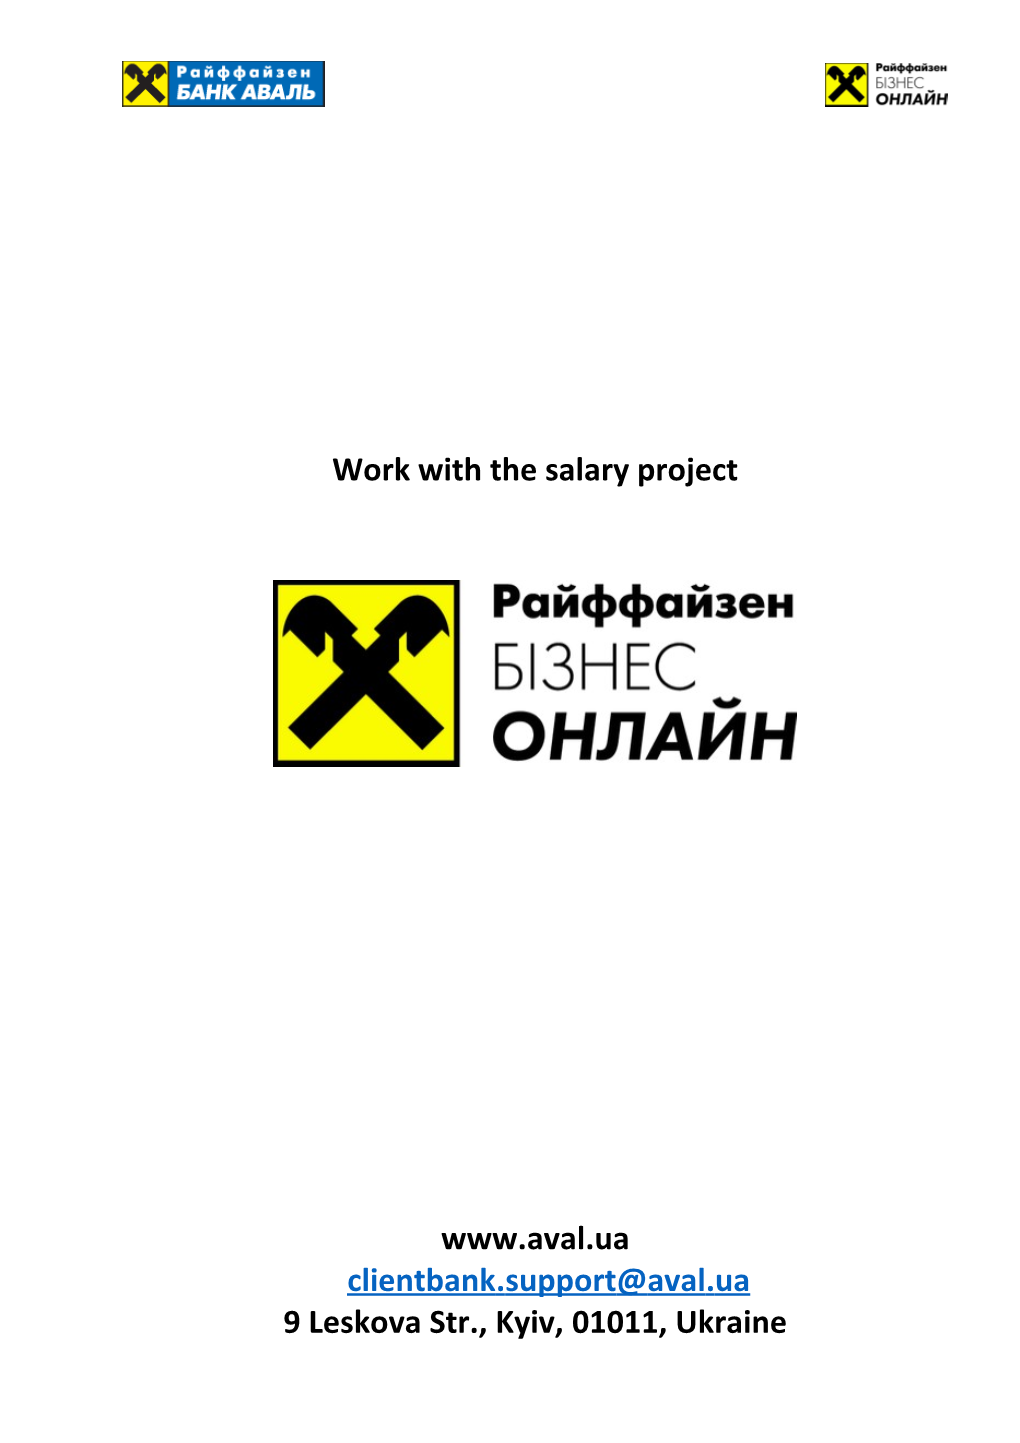 Work with the Salary Project